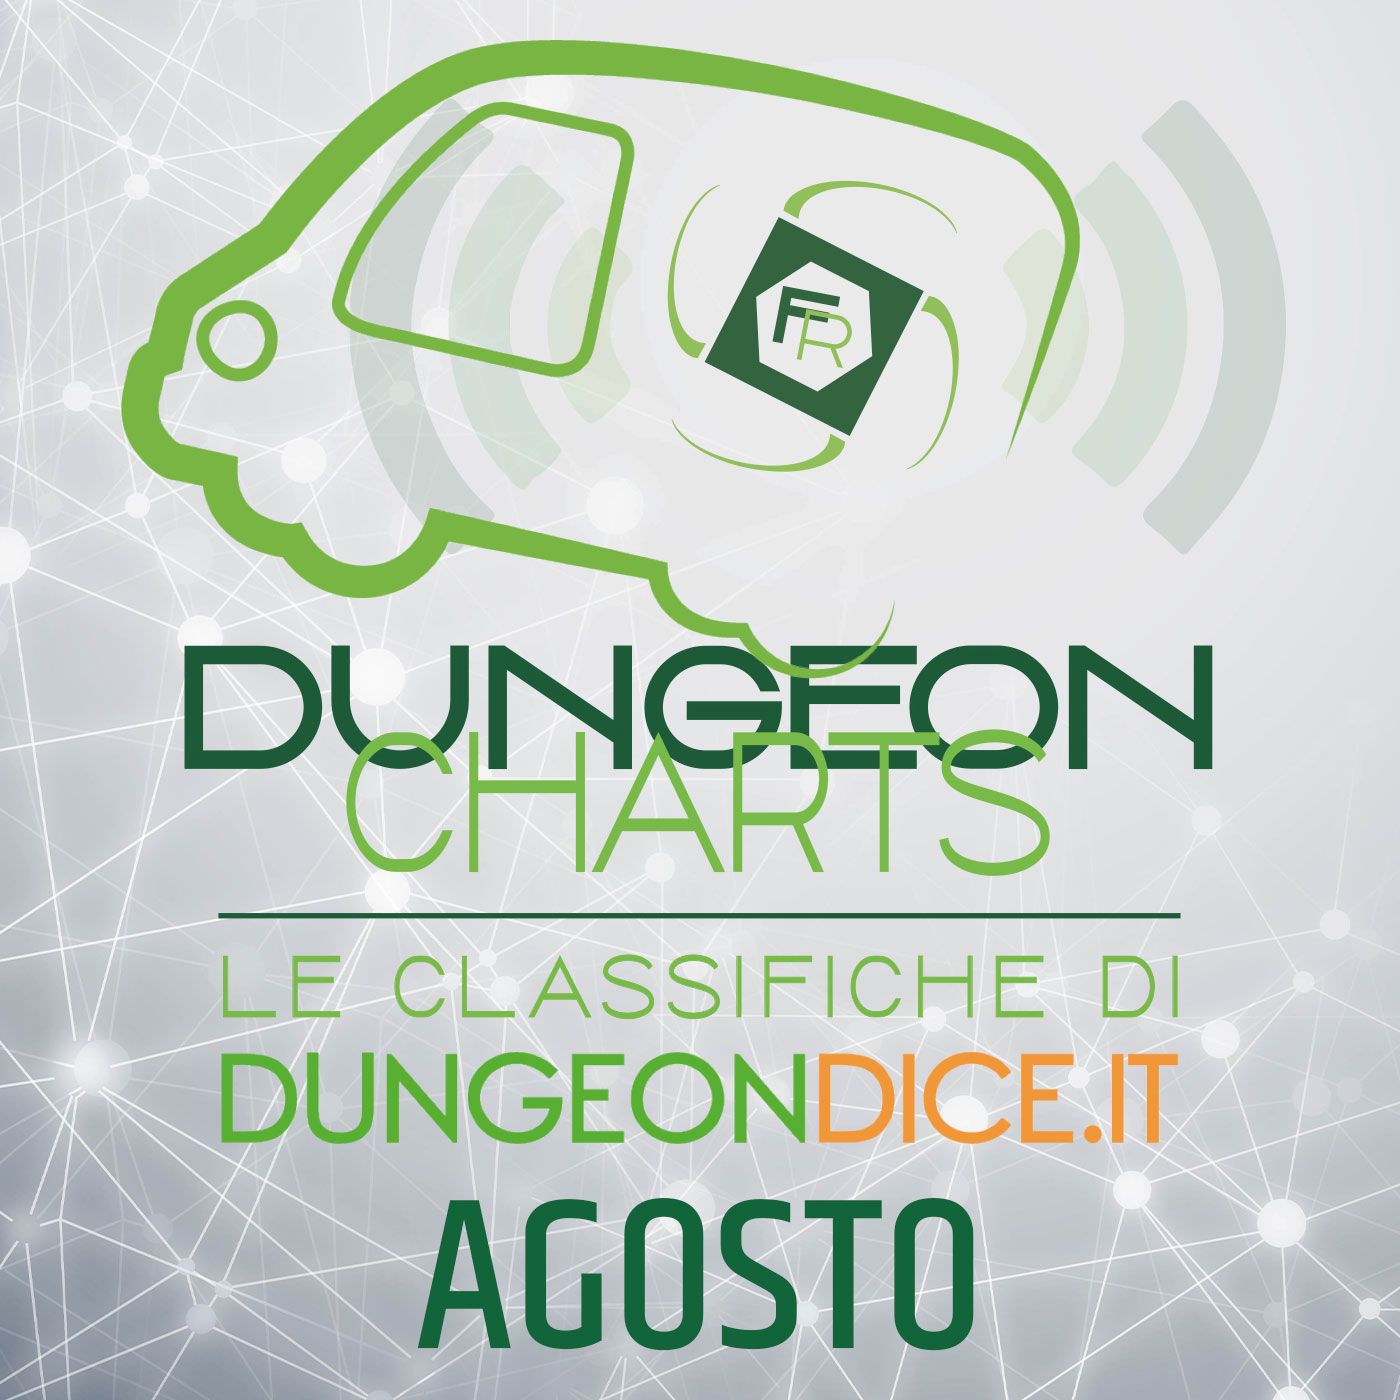 Dungeon Charts - Agosto 2021